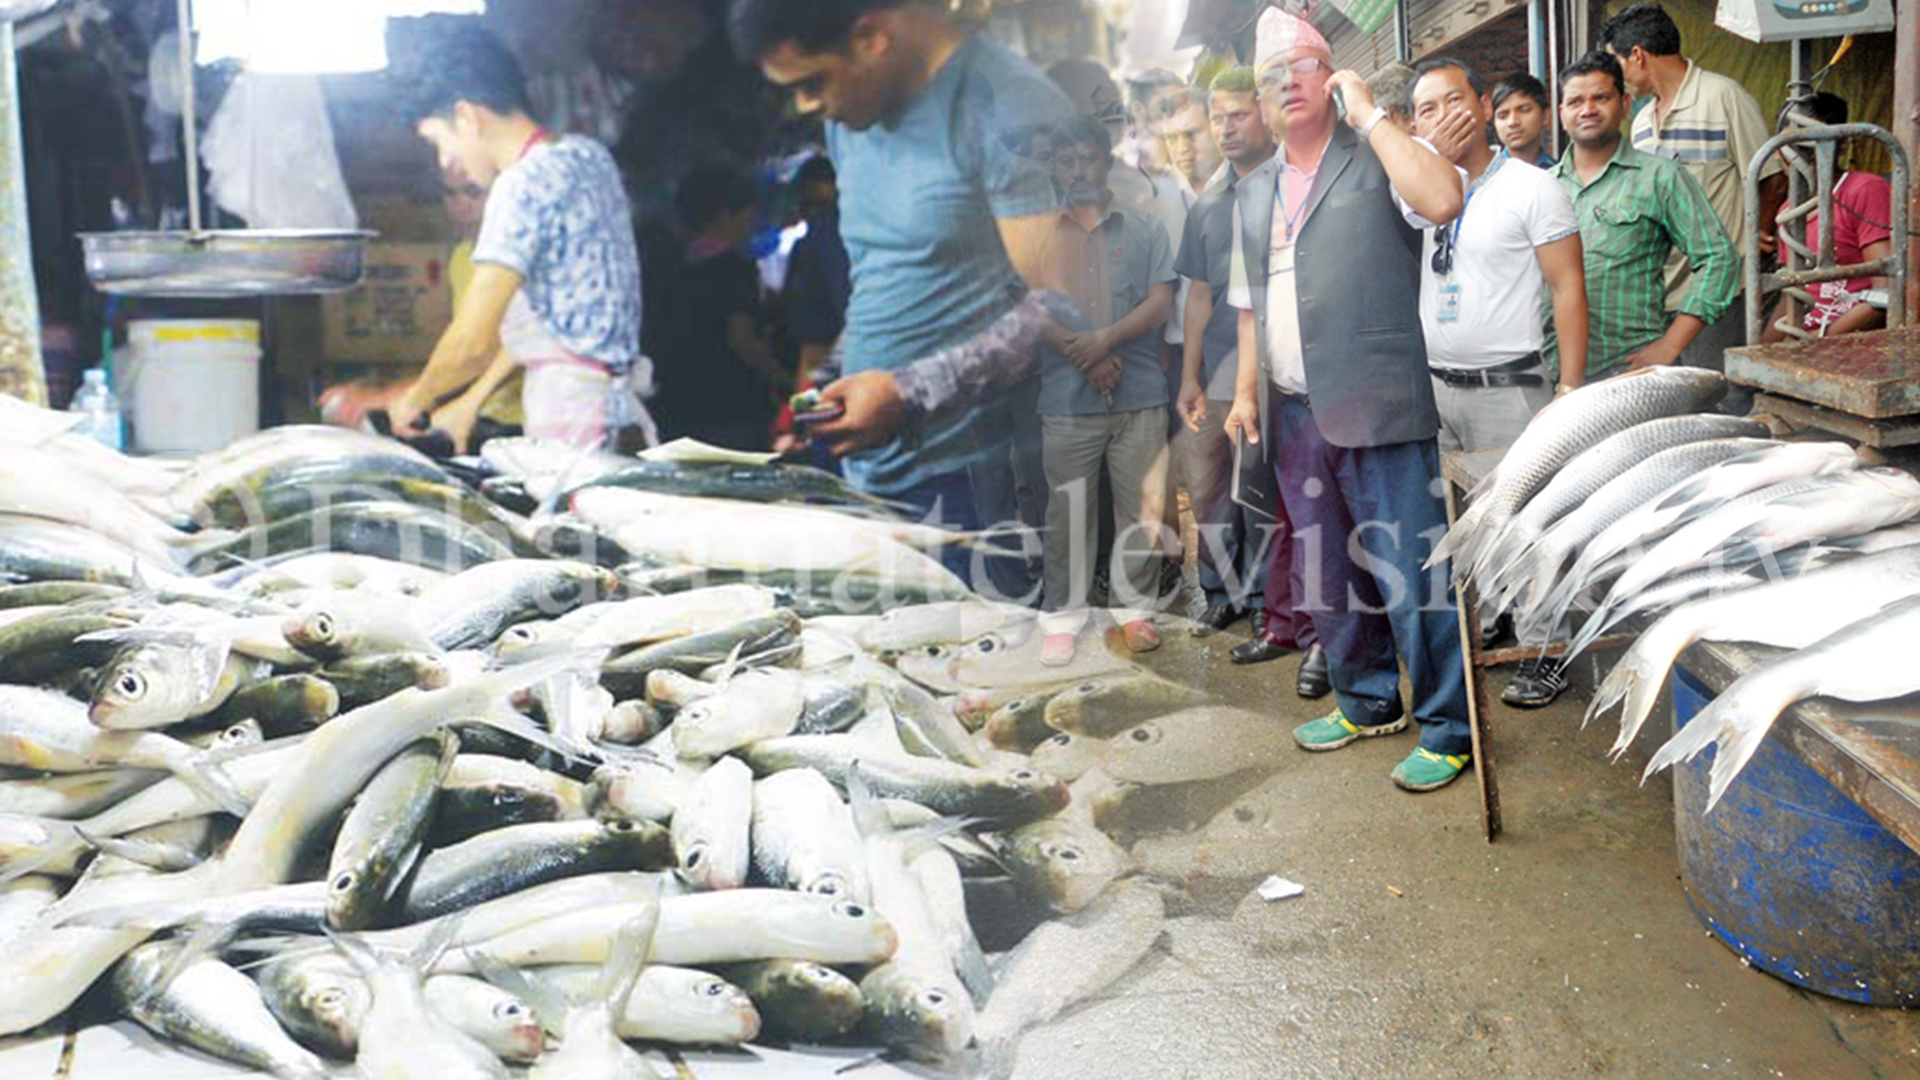 Fish Traders Run Away after Monitoring Team Arrived at Kalimati to Inspect Shops